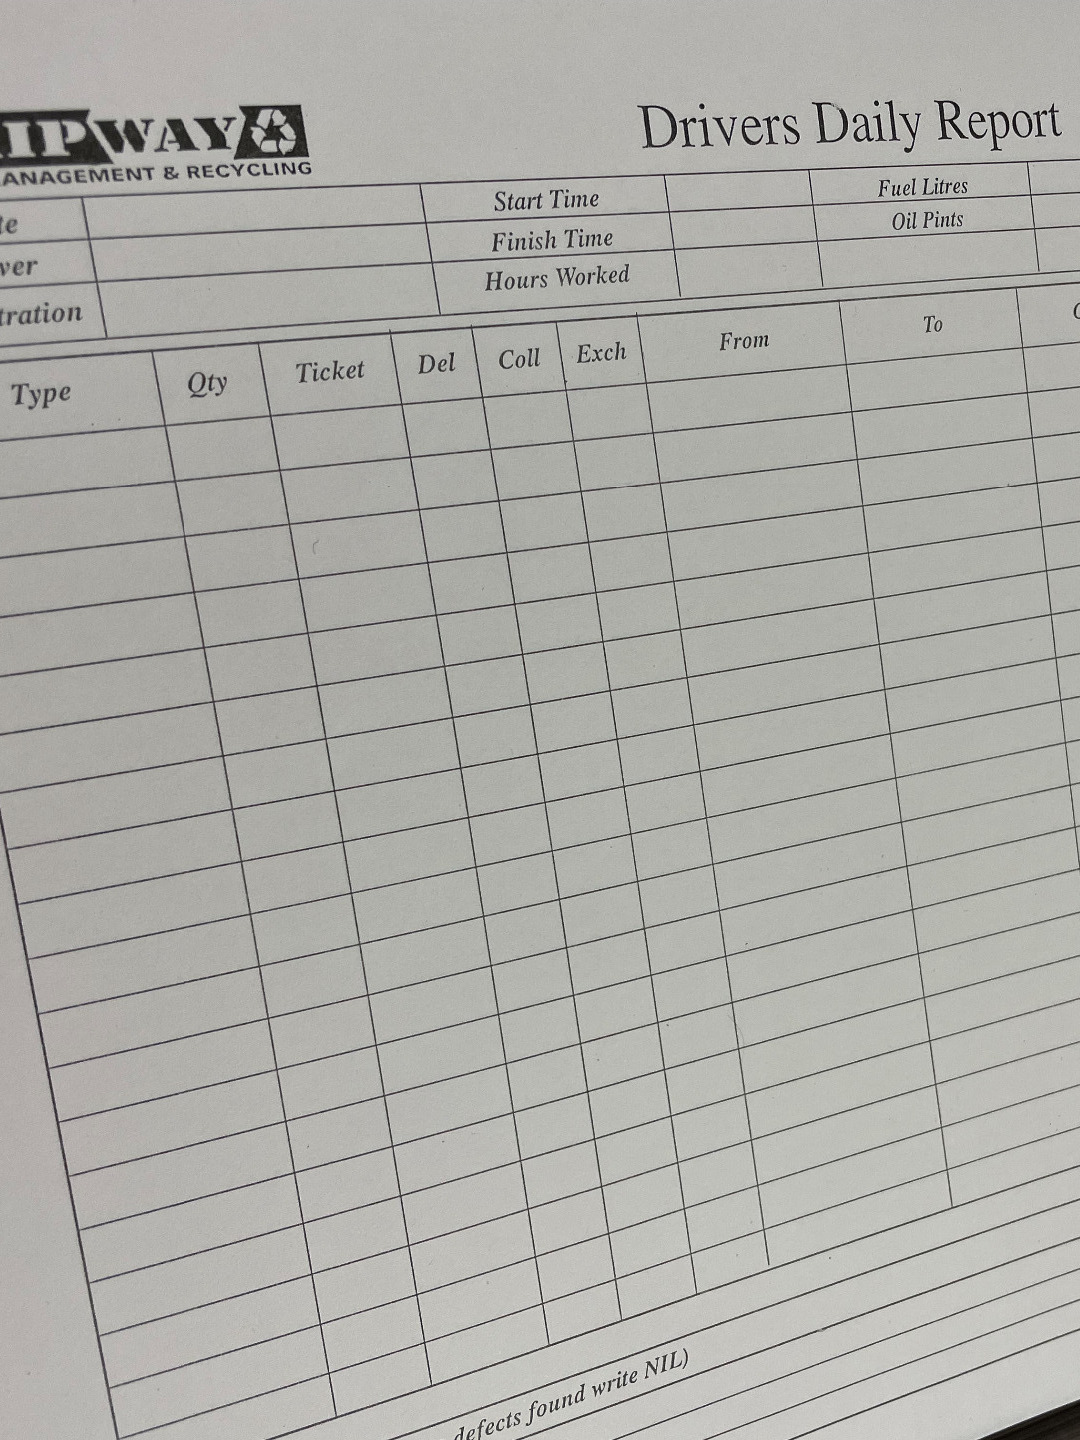 Drivers Daily Log Sheets and Checklists printed by Gillprint Ltd, Dungannon, Northern Ireland